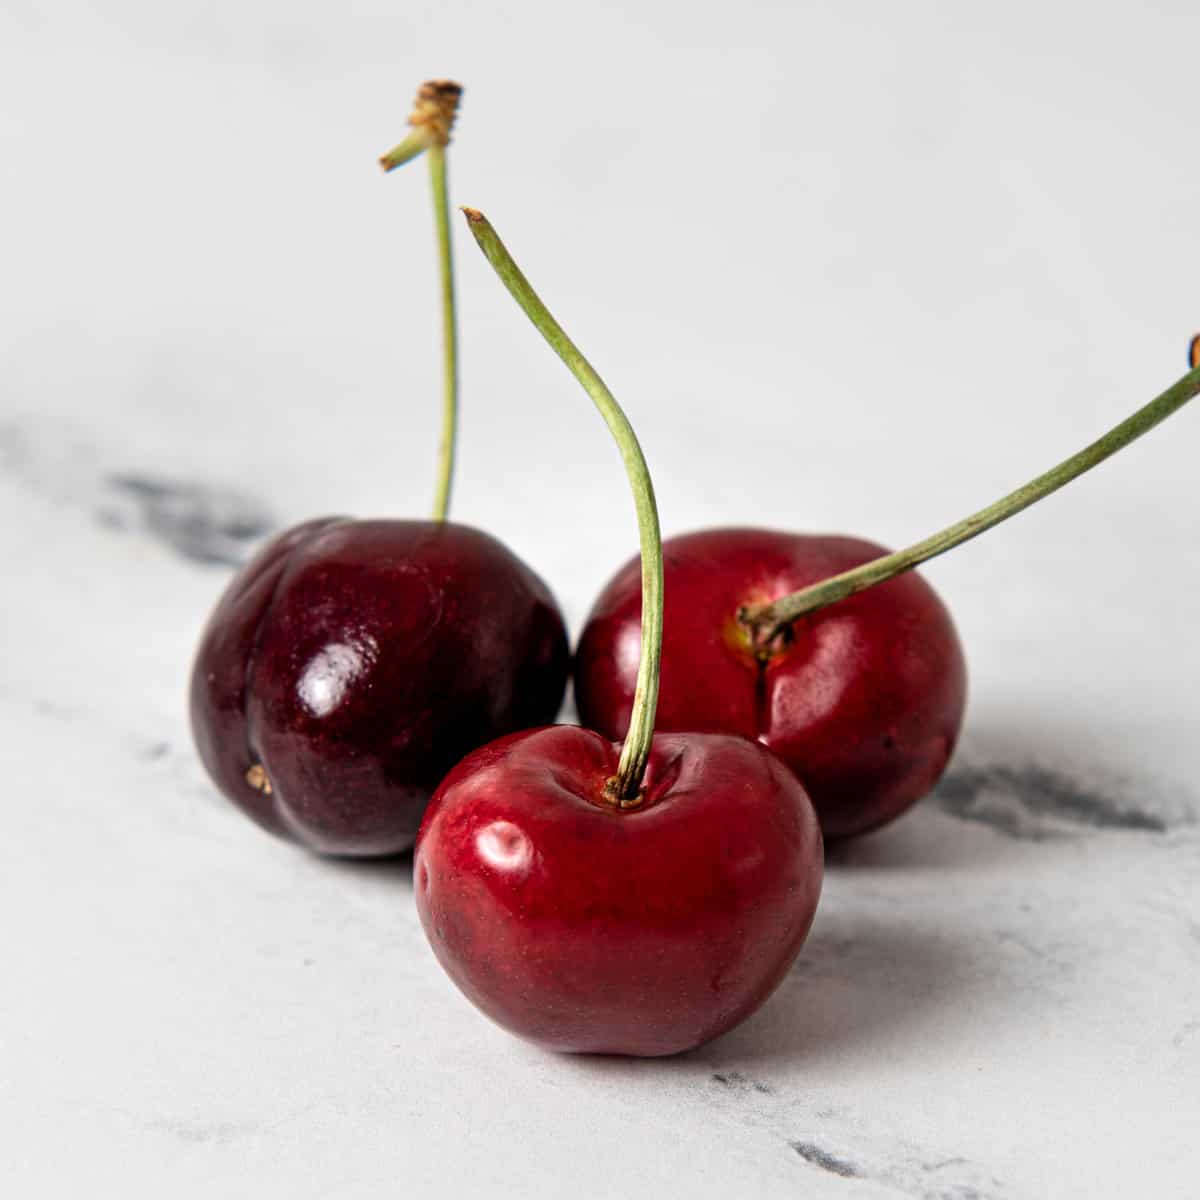 Cherries on a kitchen counter.